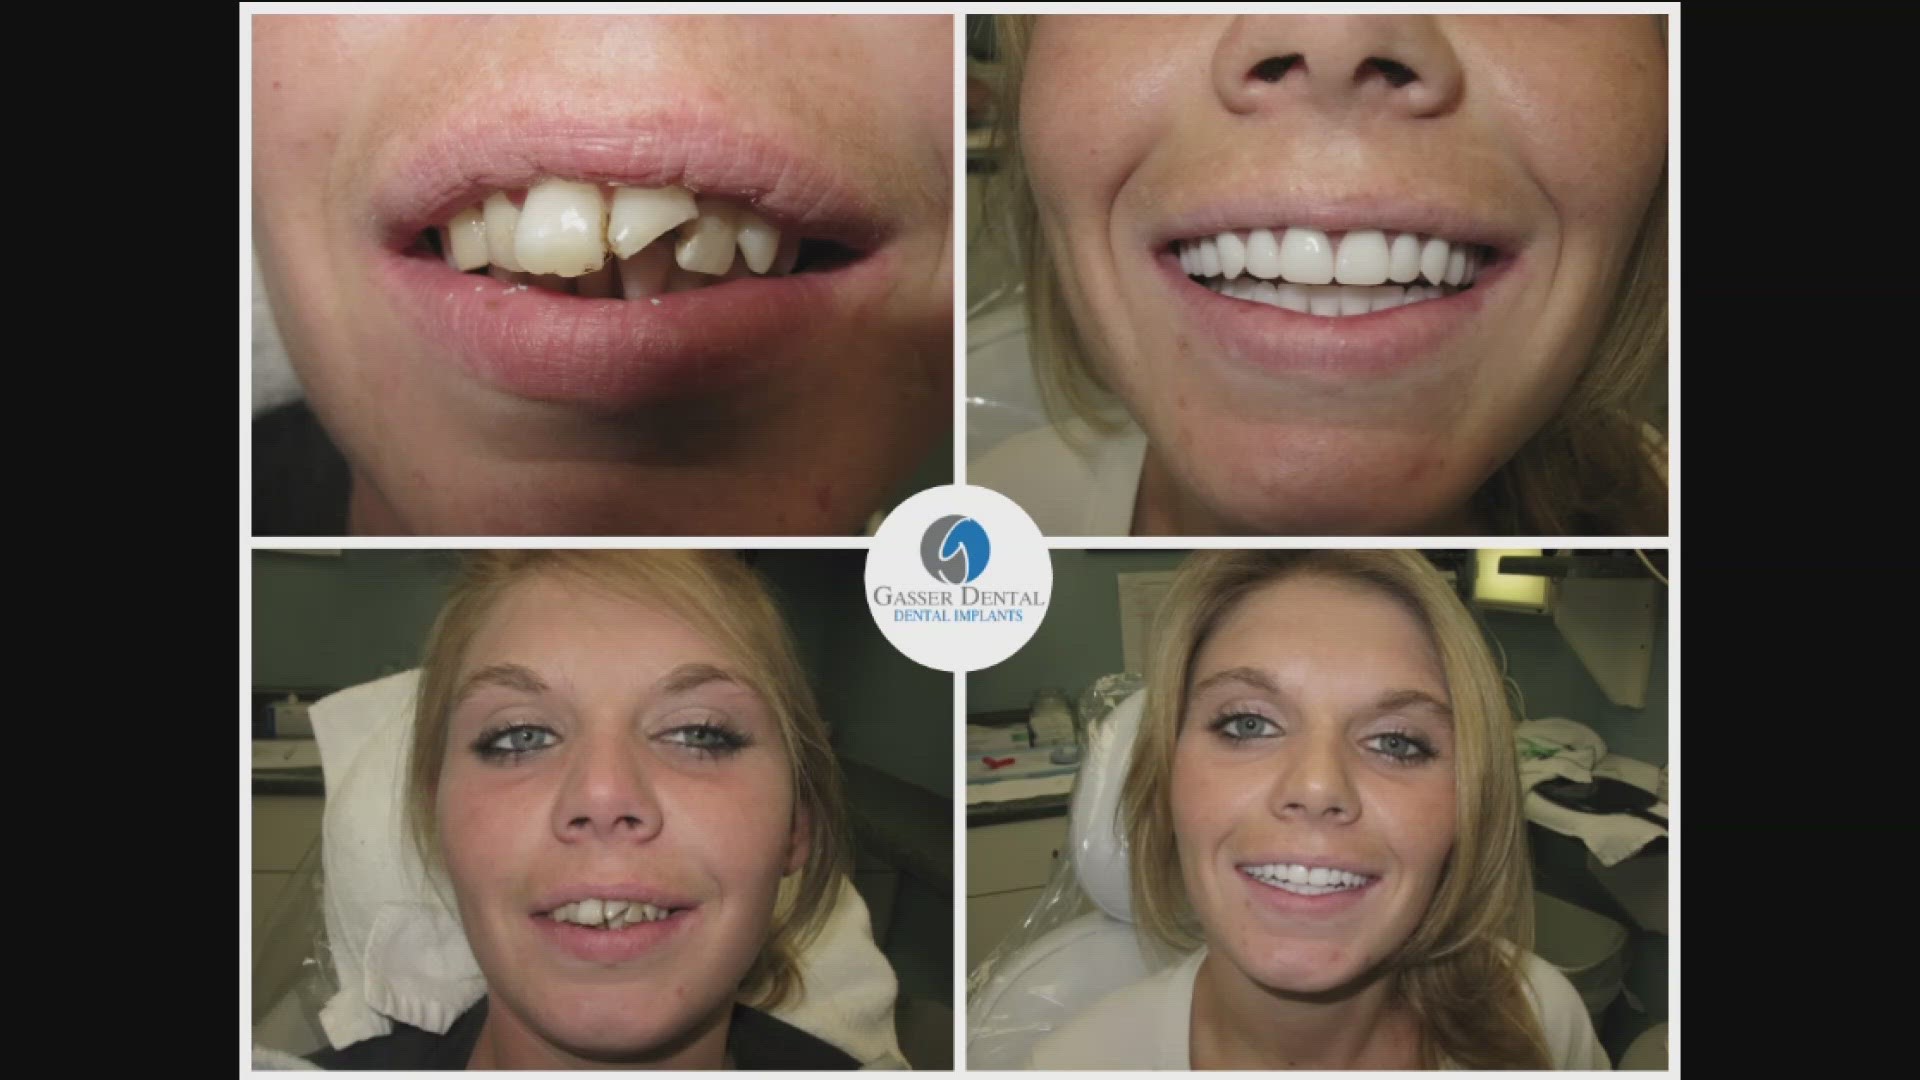 Robin Kill shares how a smile transformation from Dr Kevin Gasser of Gasser Dental has given her a confidence boost.